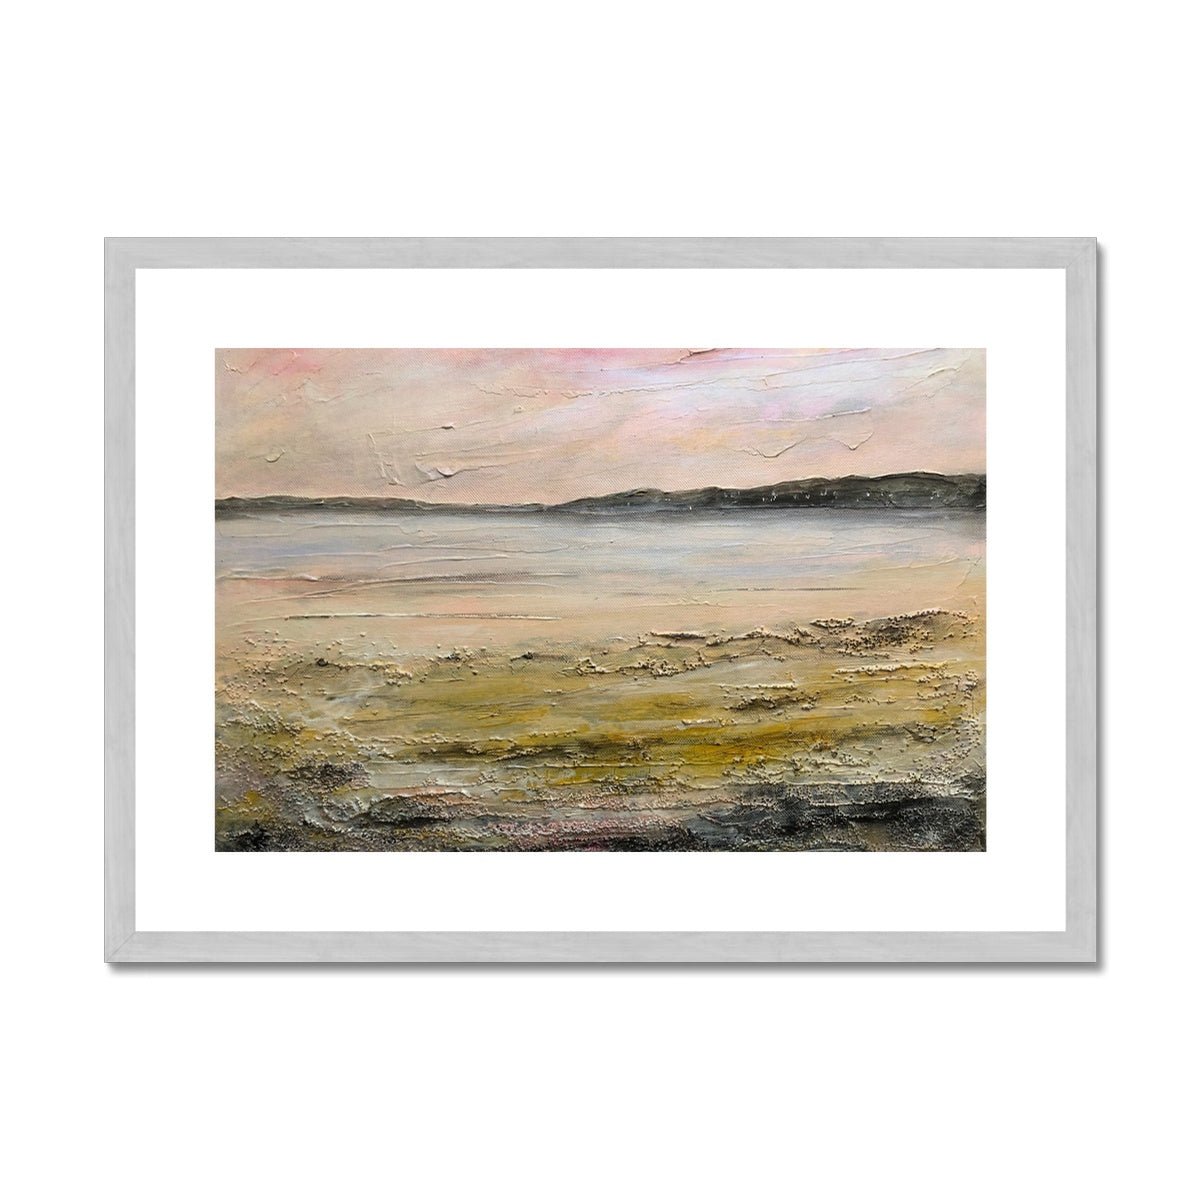 Sandgreen Painting | Antique Framed & Mounted Prints From Scotland-Antique Framed & Mounted Prints-Scottish Highlands & Lowlands Art Gallery-A2 Landscape-Silver Frame-Paintings, Prints, Homeware, Art Gifts From Scotland By Scottish Artist Kevin Hunter